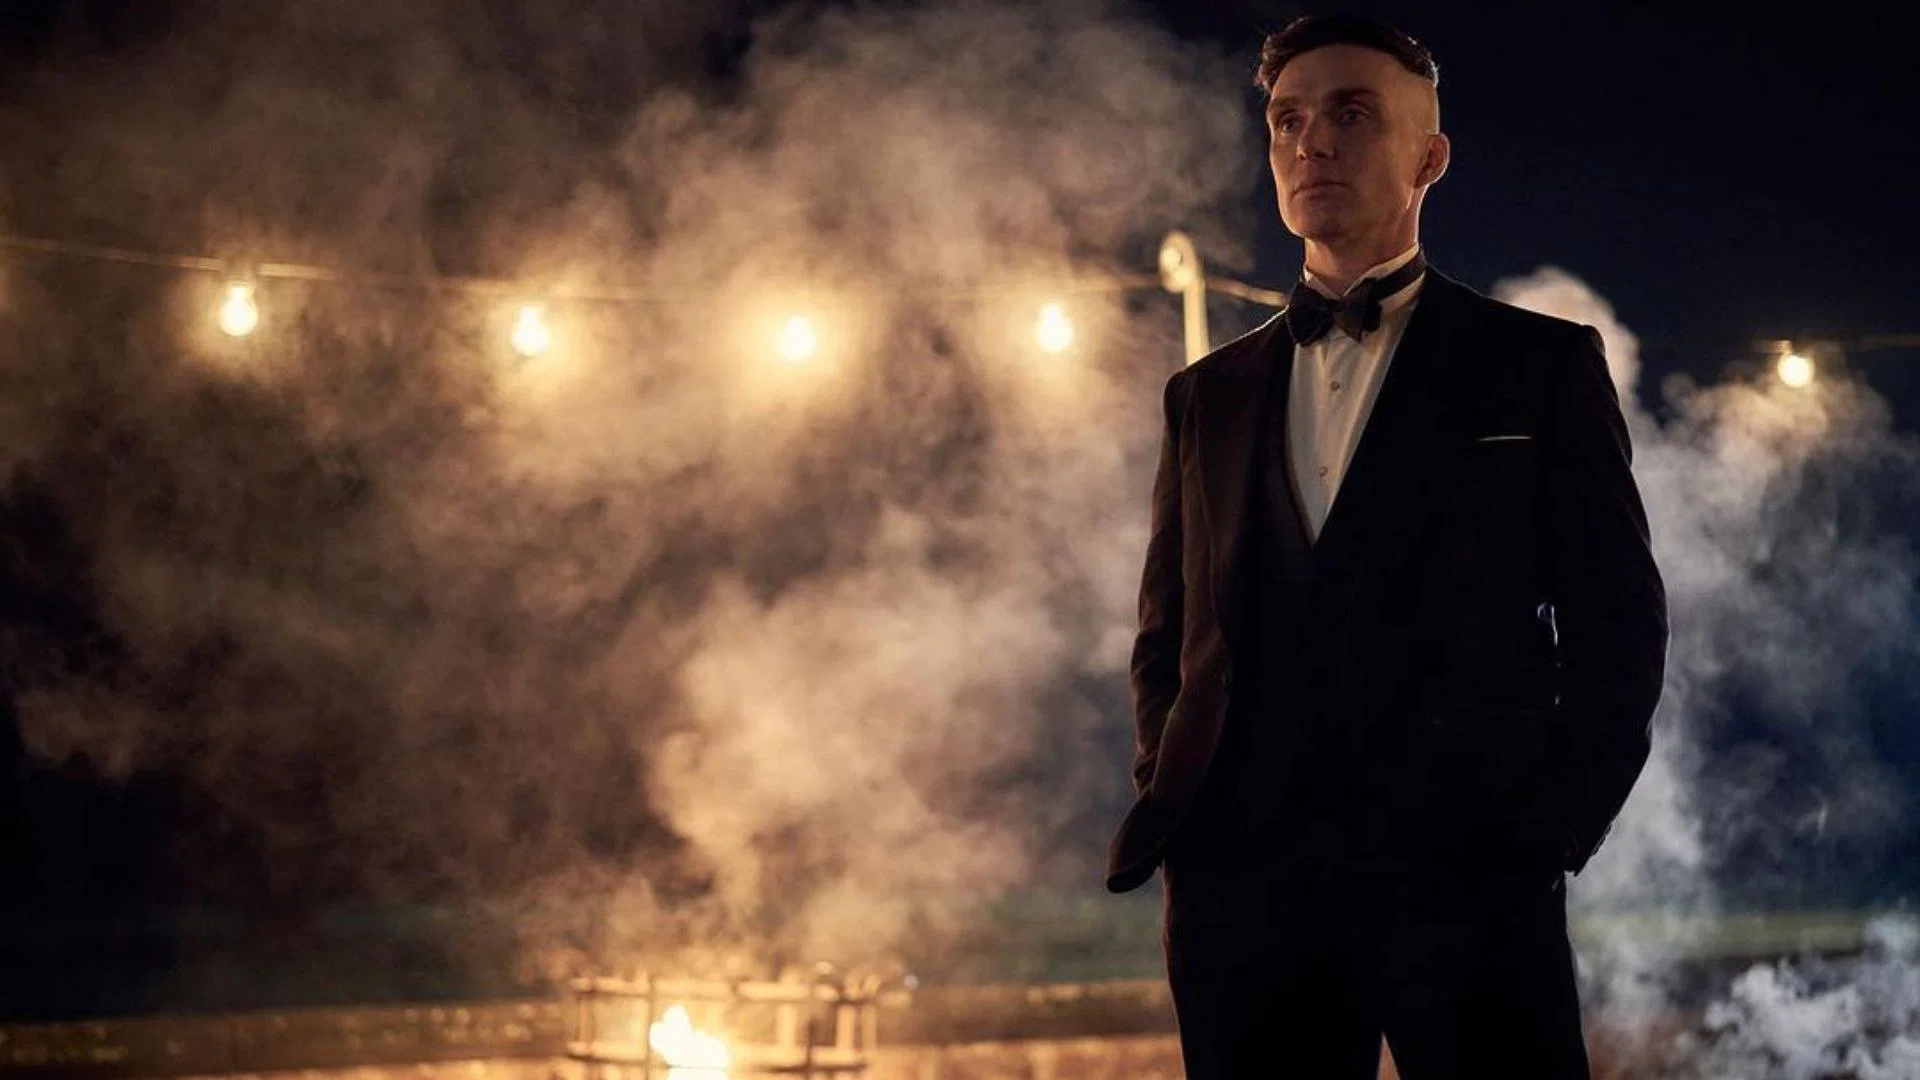 Shelby Family, Peaky Blinders episodes, Must-watch, 1920x1080 Full HD Desktop